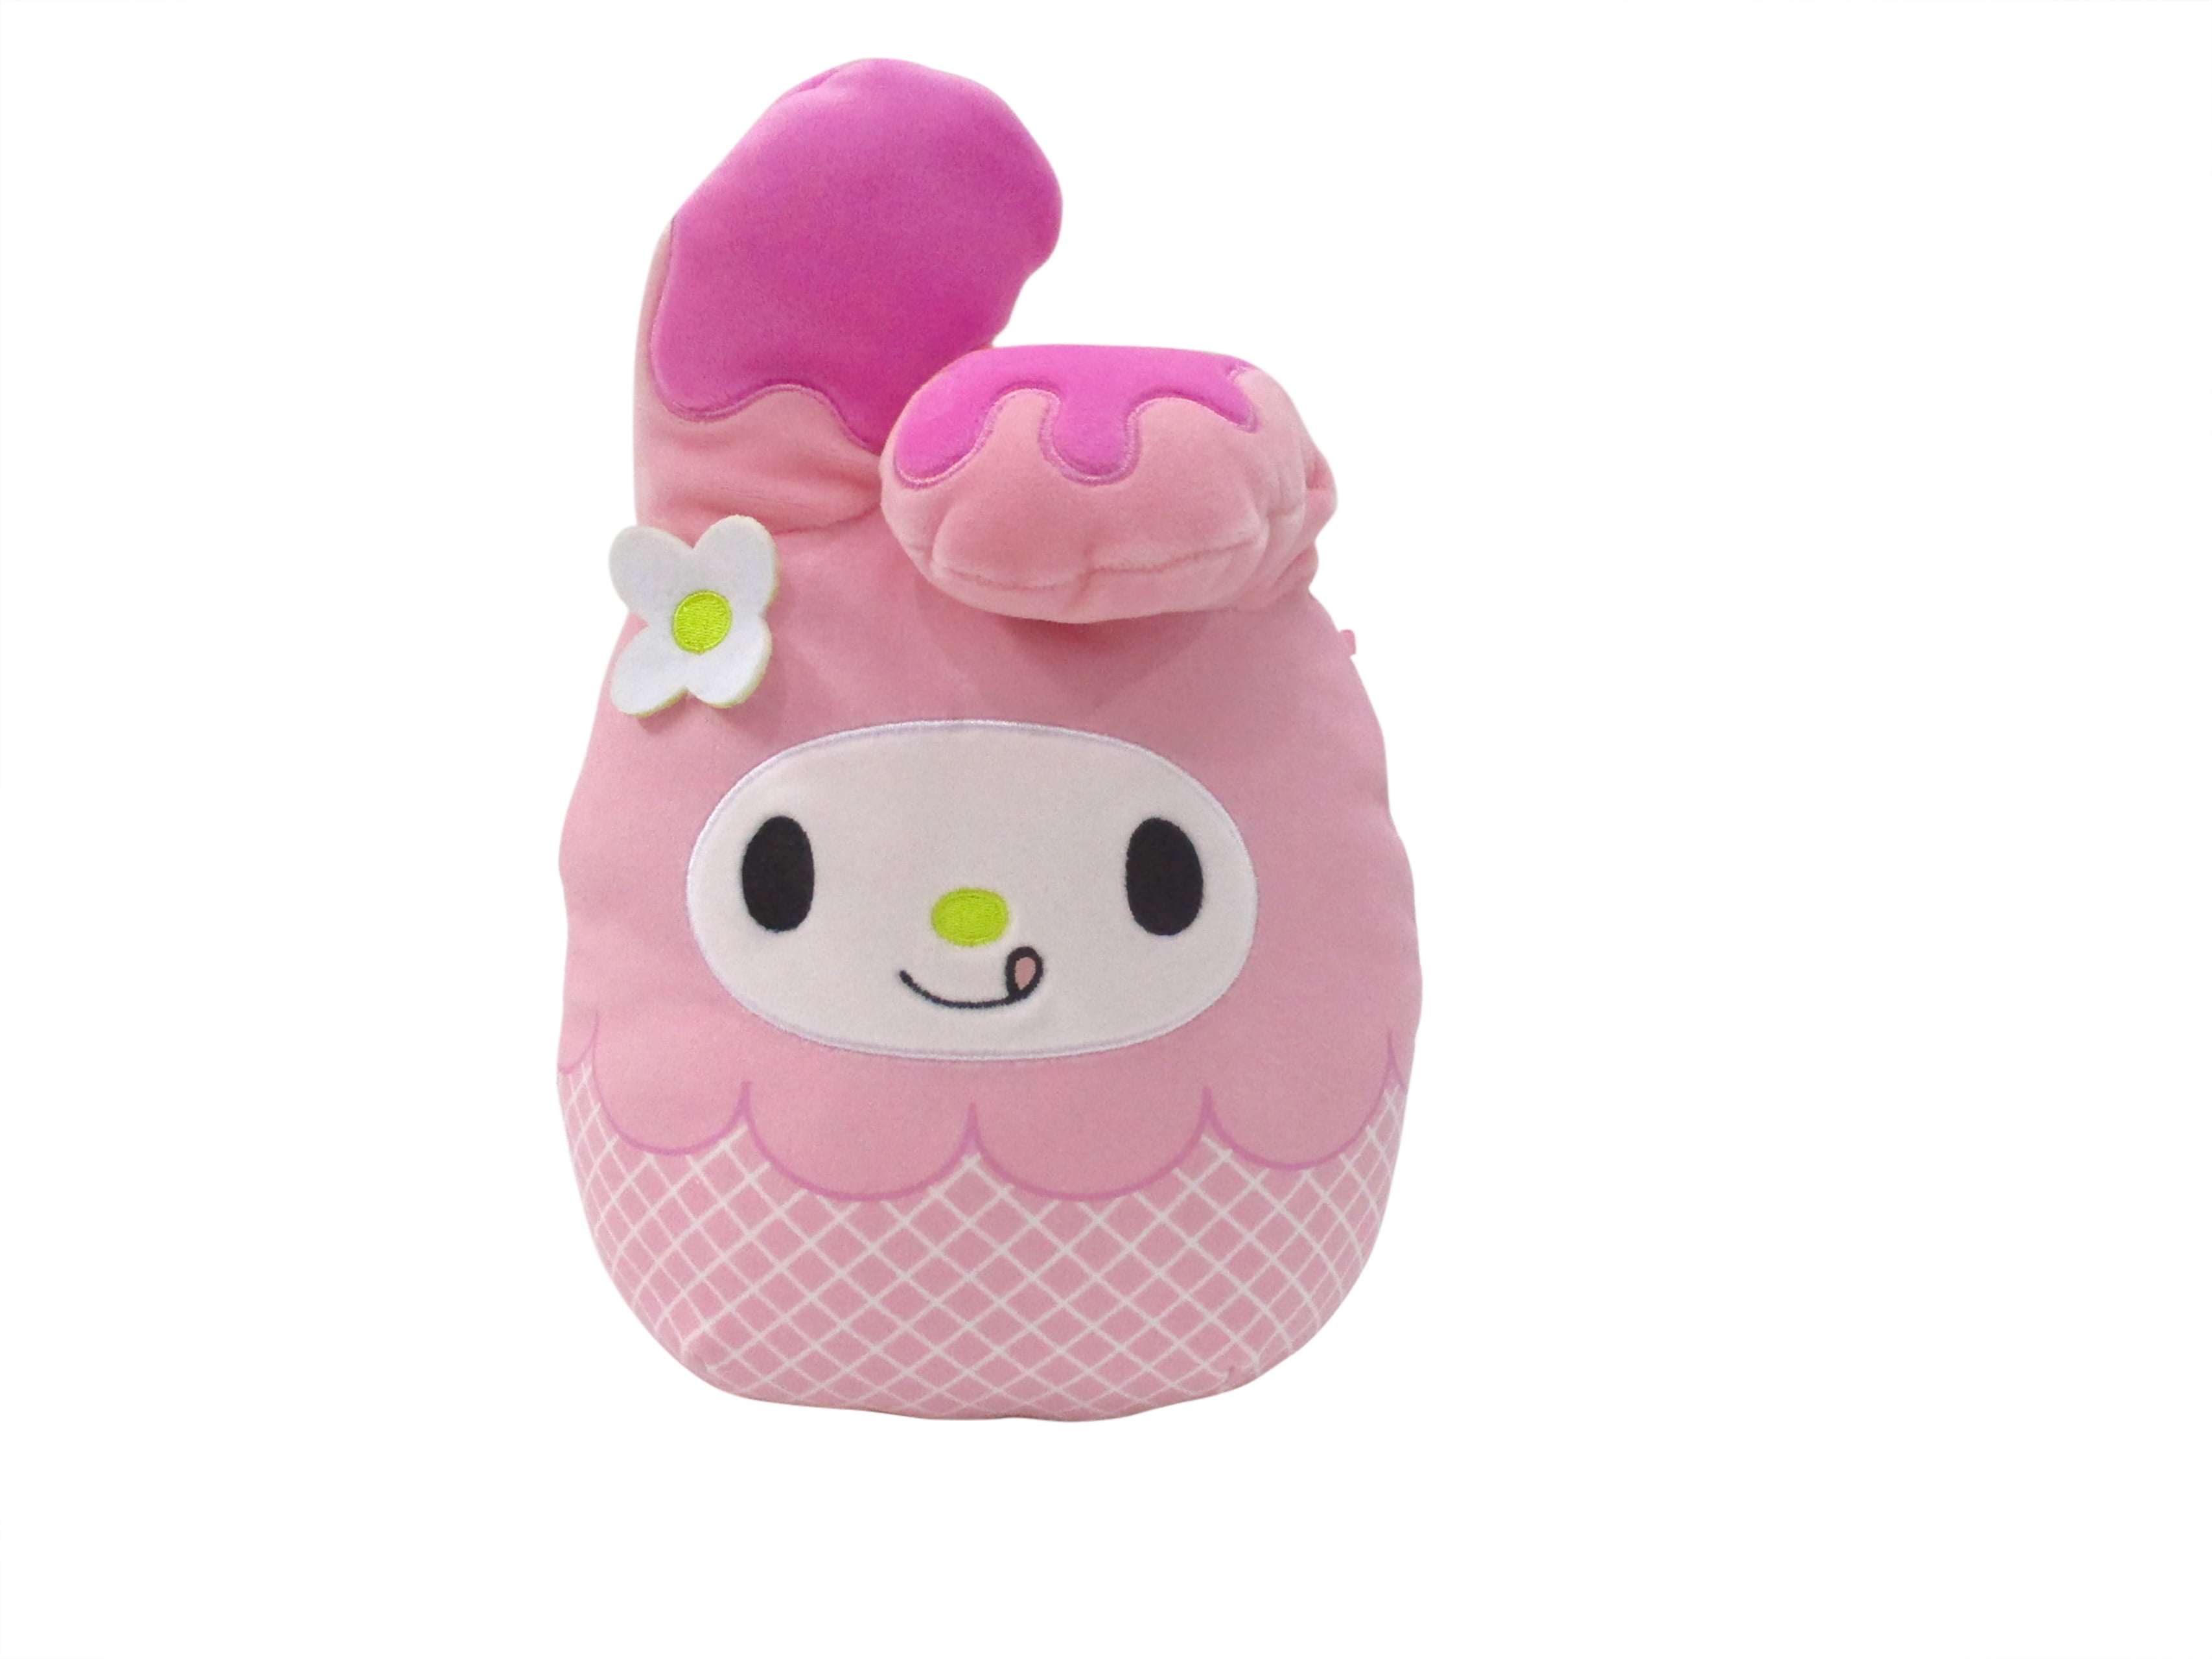 NEW My Melody Cleaning Robot Machine for Floor Sanrio from Japan